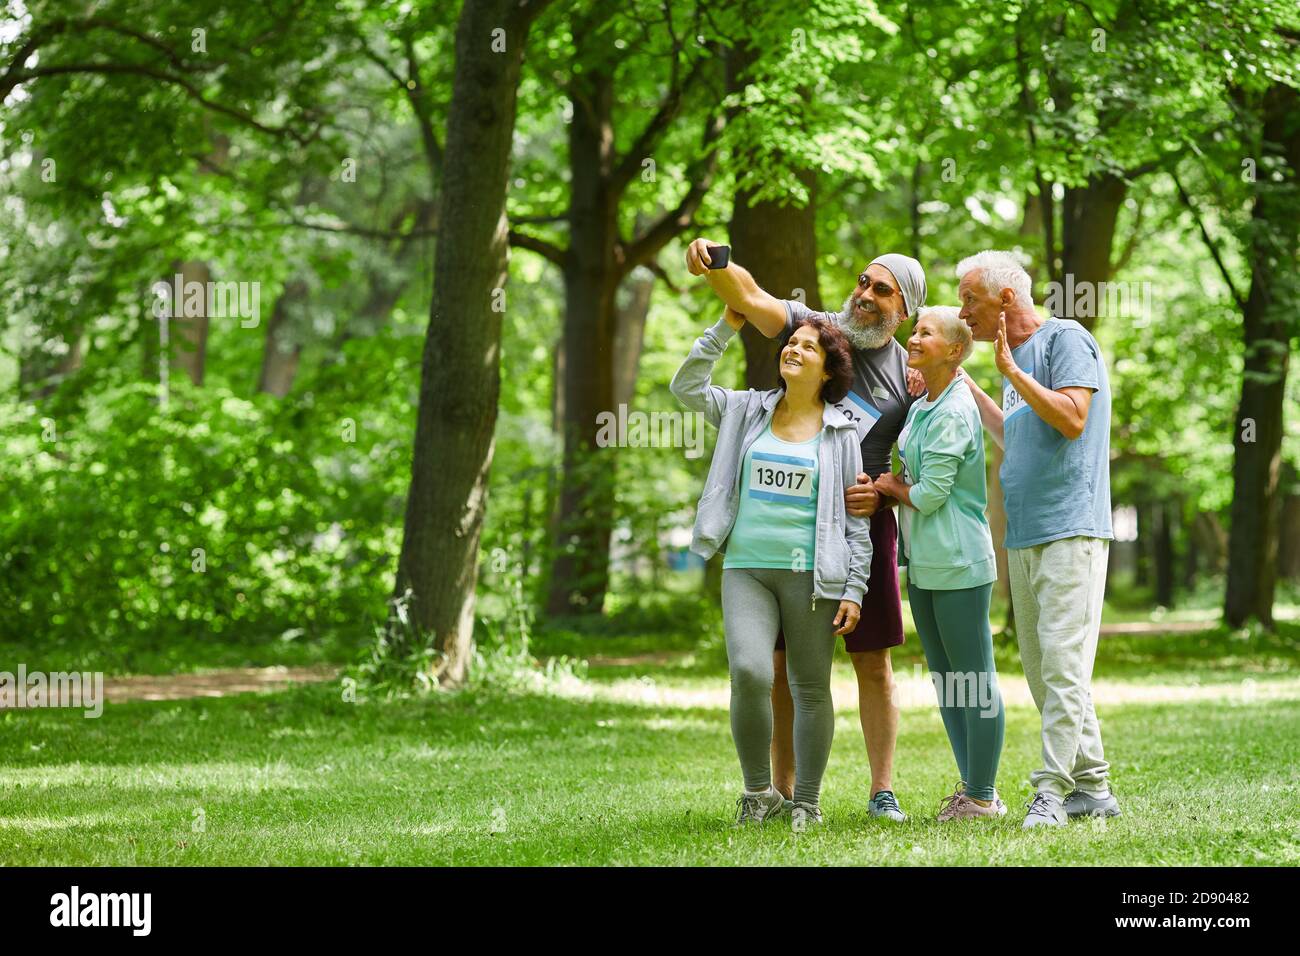 Group of joyful sporty senior adult men and women standing together in park taking group selfie shot on smart phone camera Stock Photo